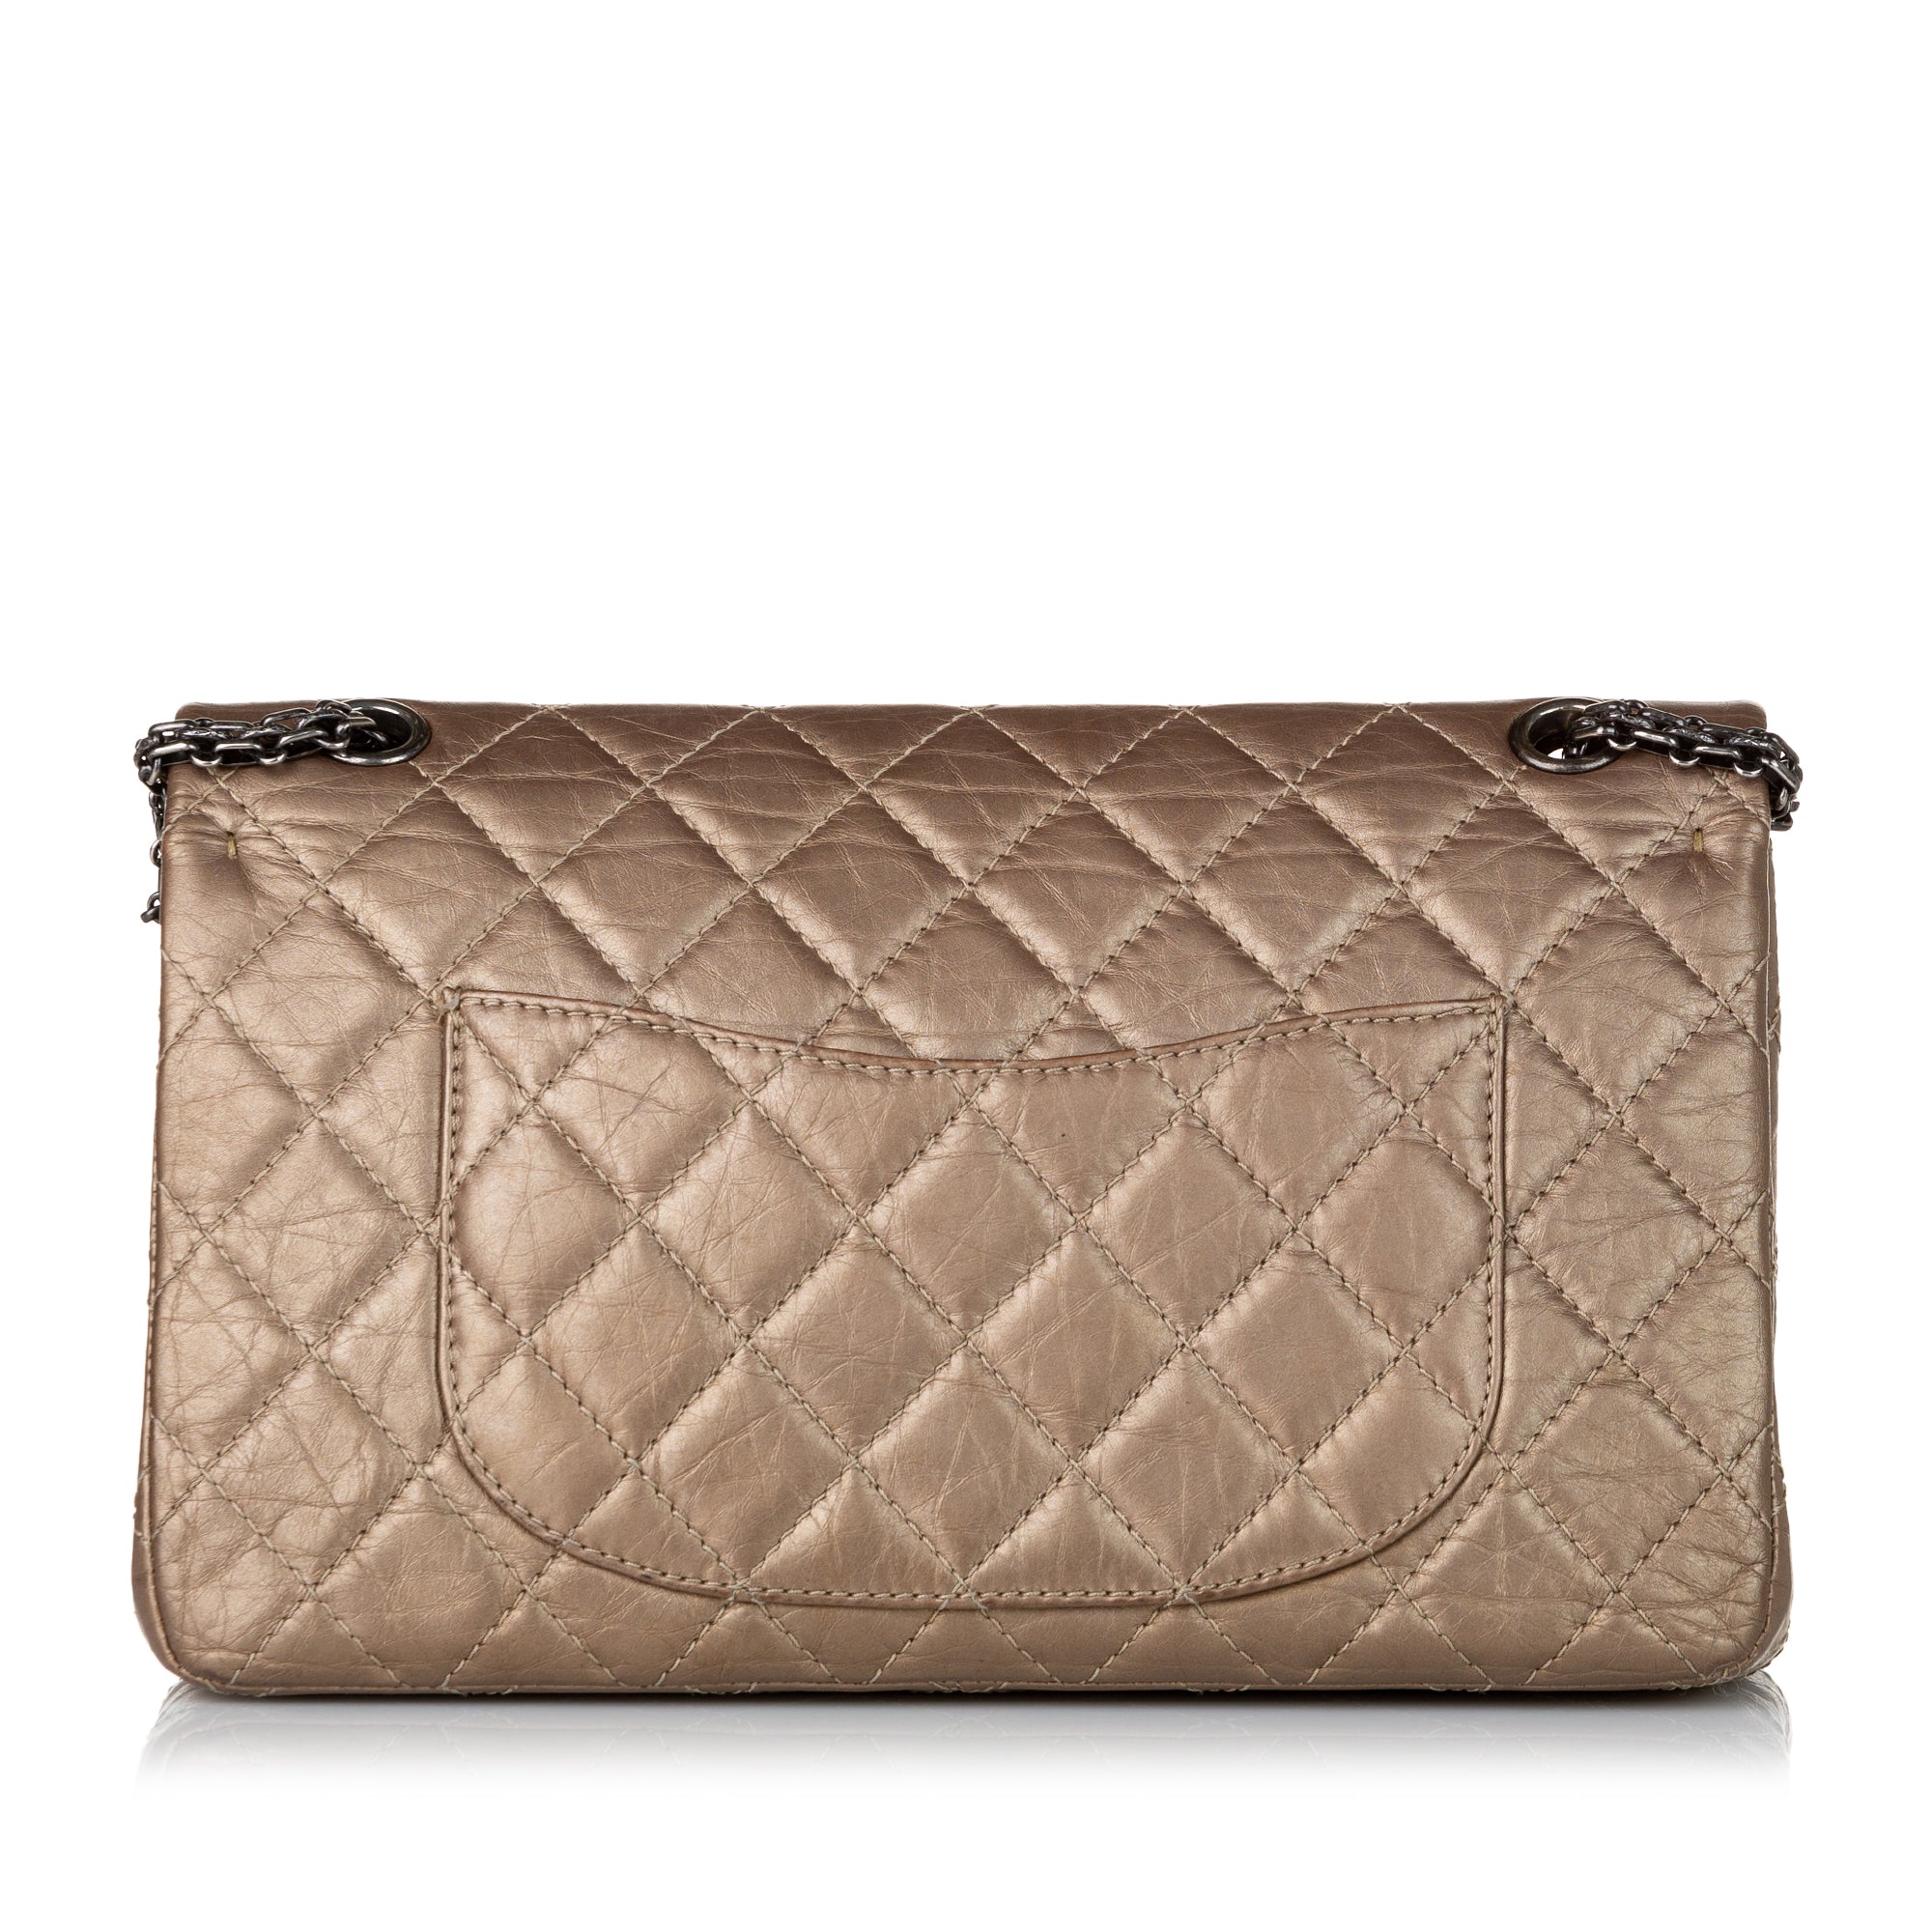 Chanel Lax Accordion Beige Lambskin Bag Preowned